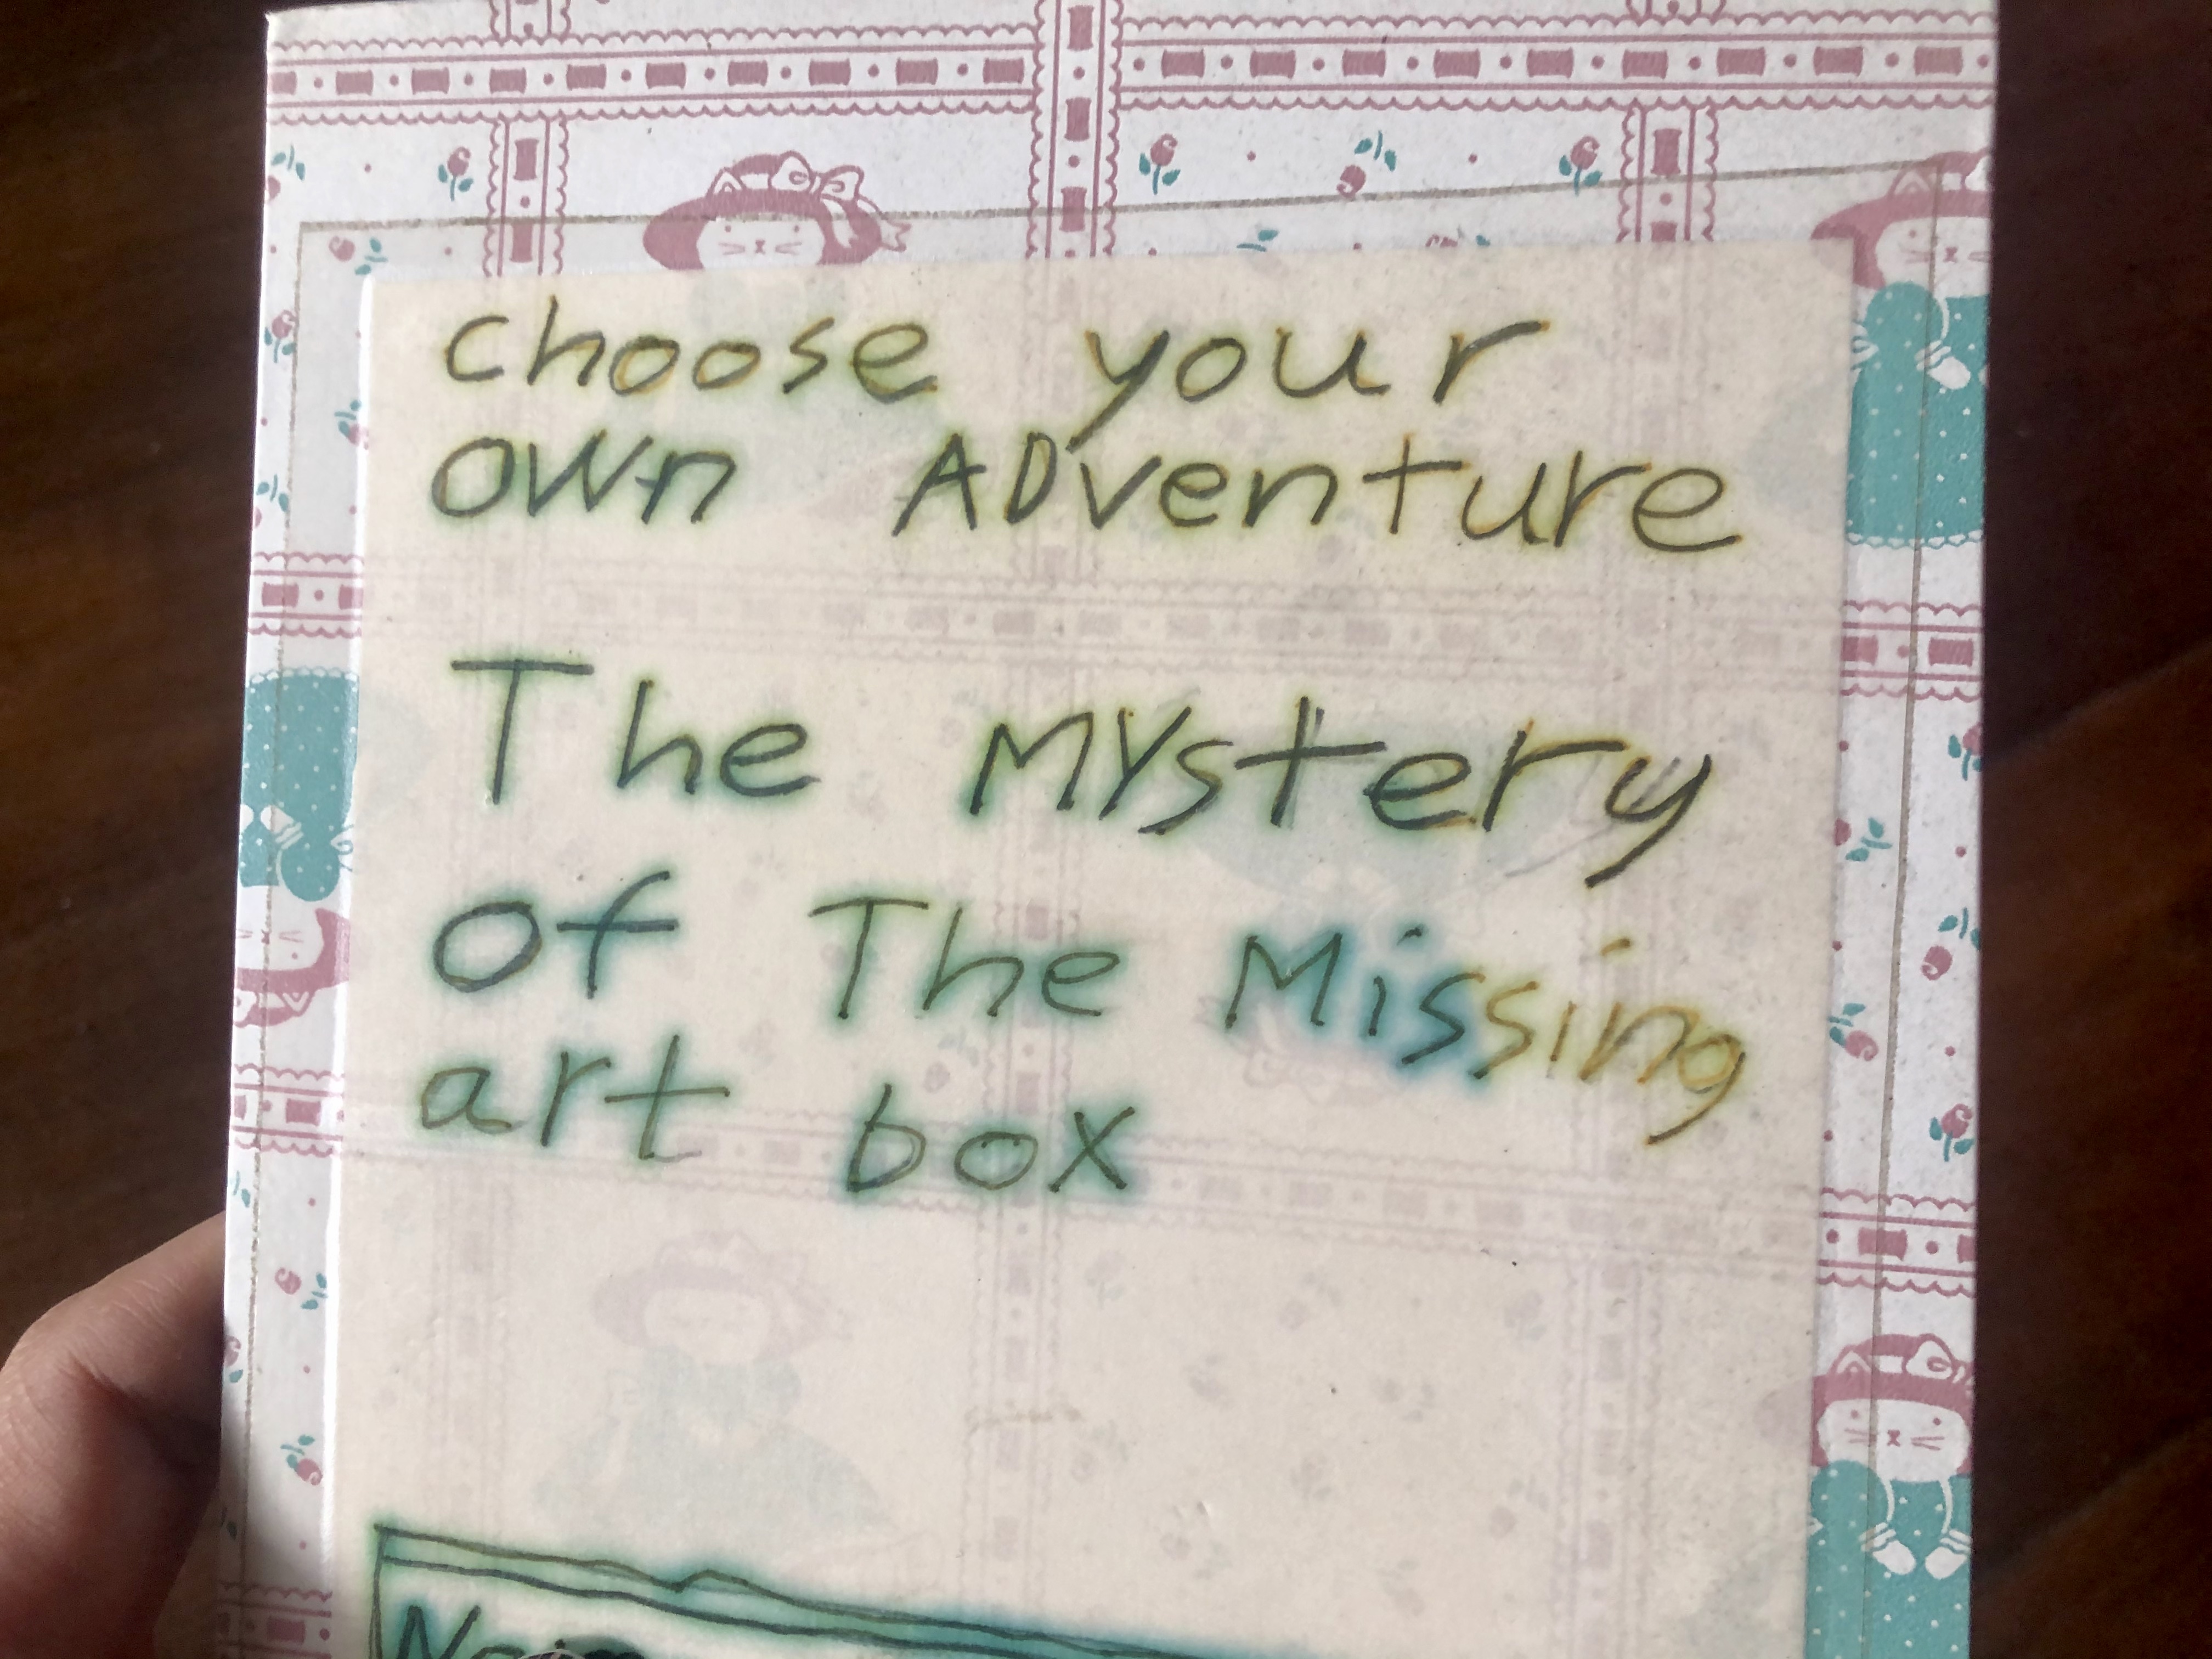 Hand-made choose-your-own-adventure book called
The Mystery of the Missing Art Box
